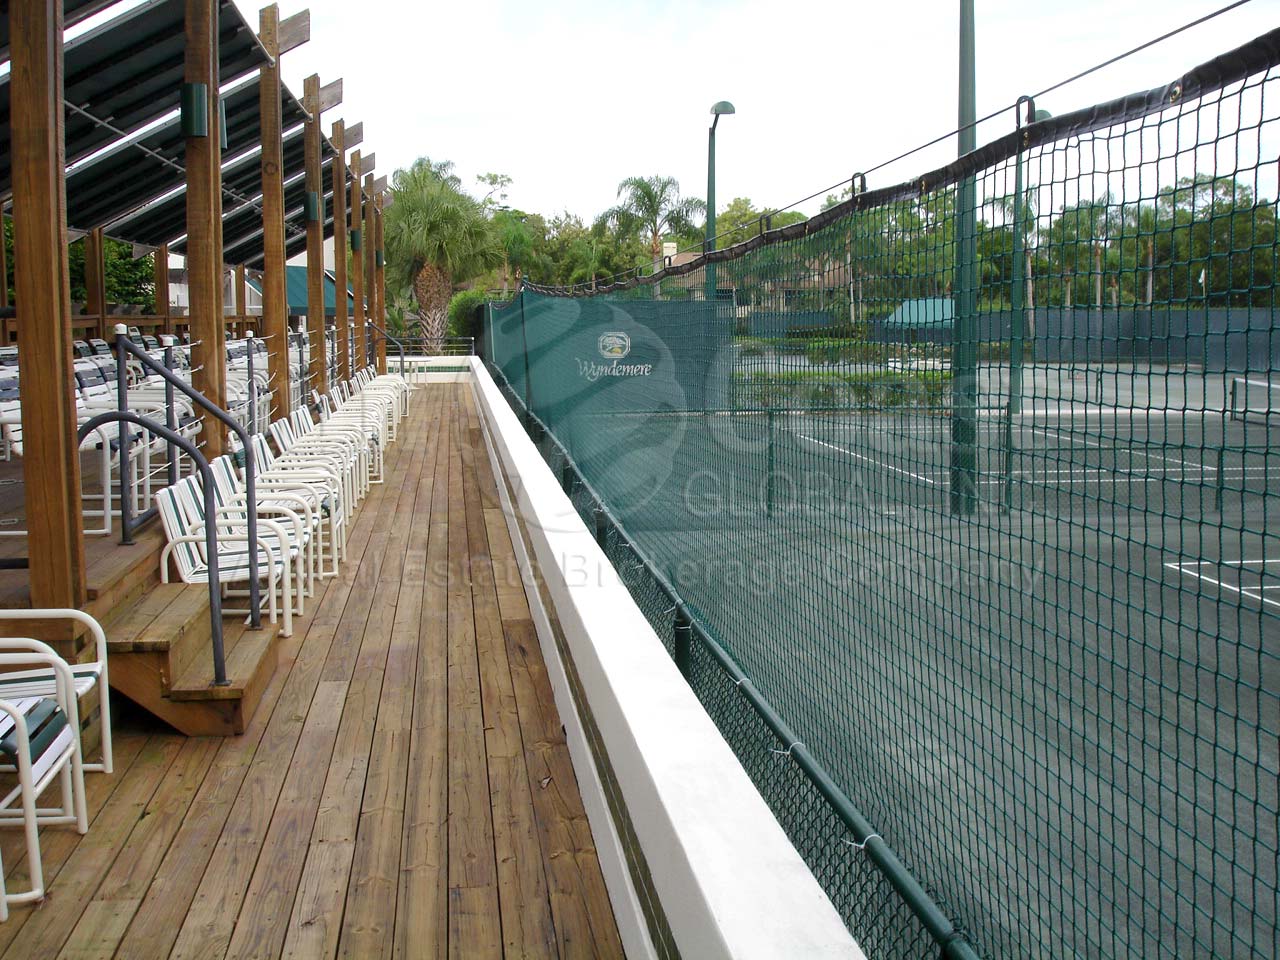 WYNDEMERE Golf and Country Club tennis courts